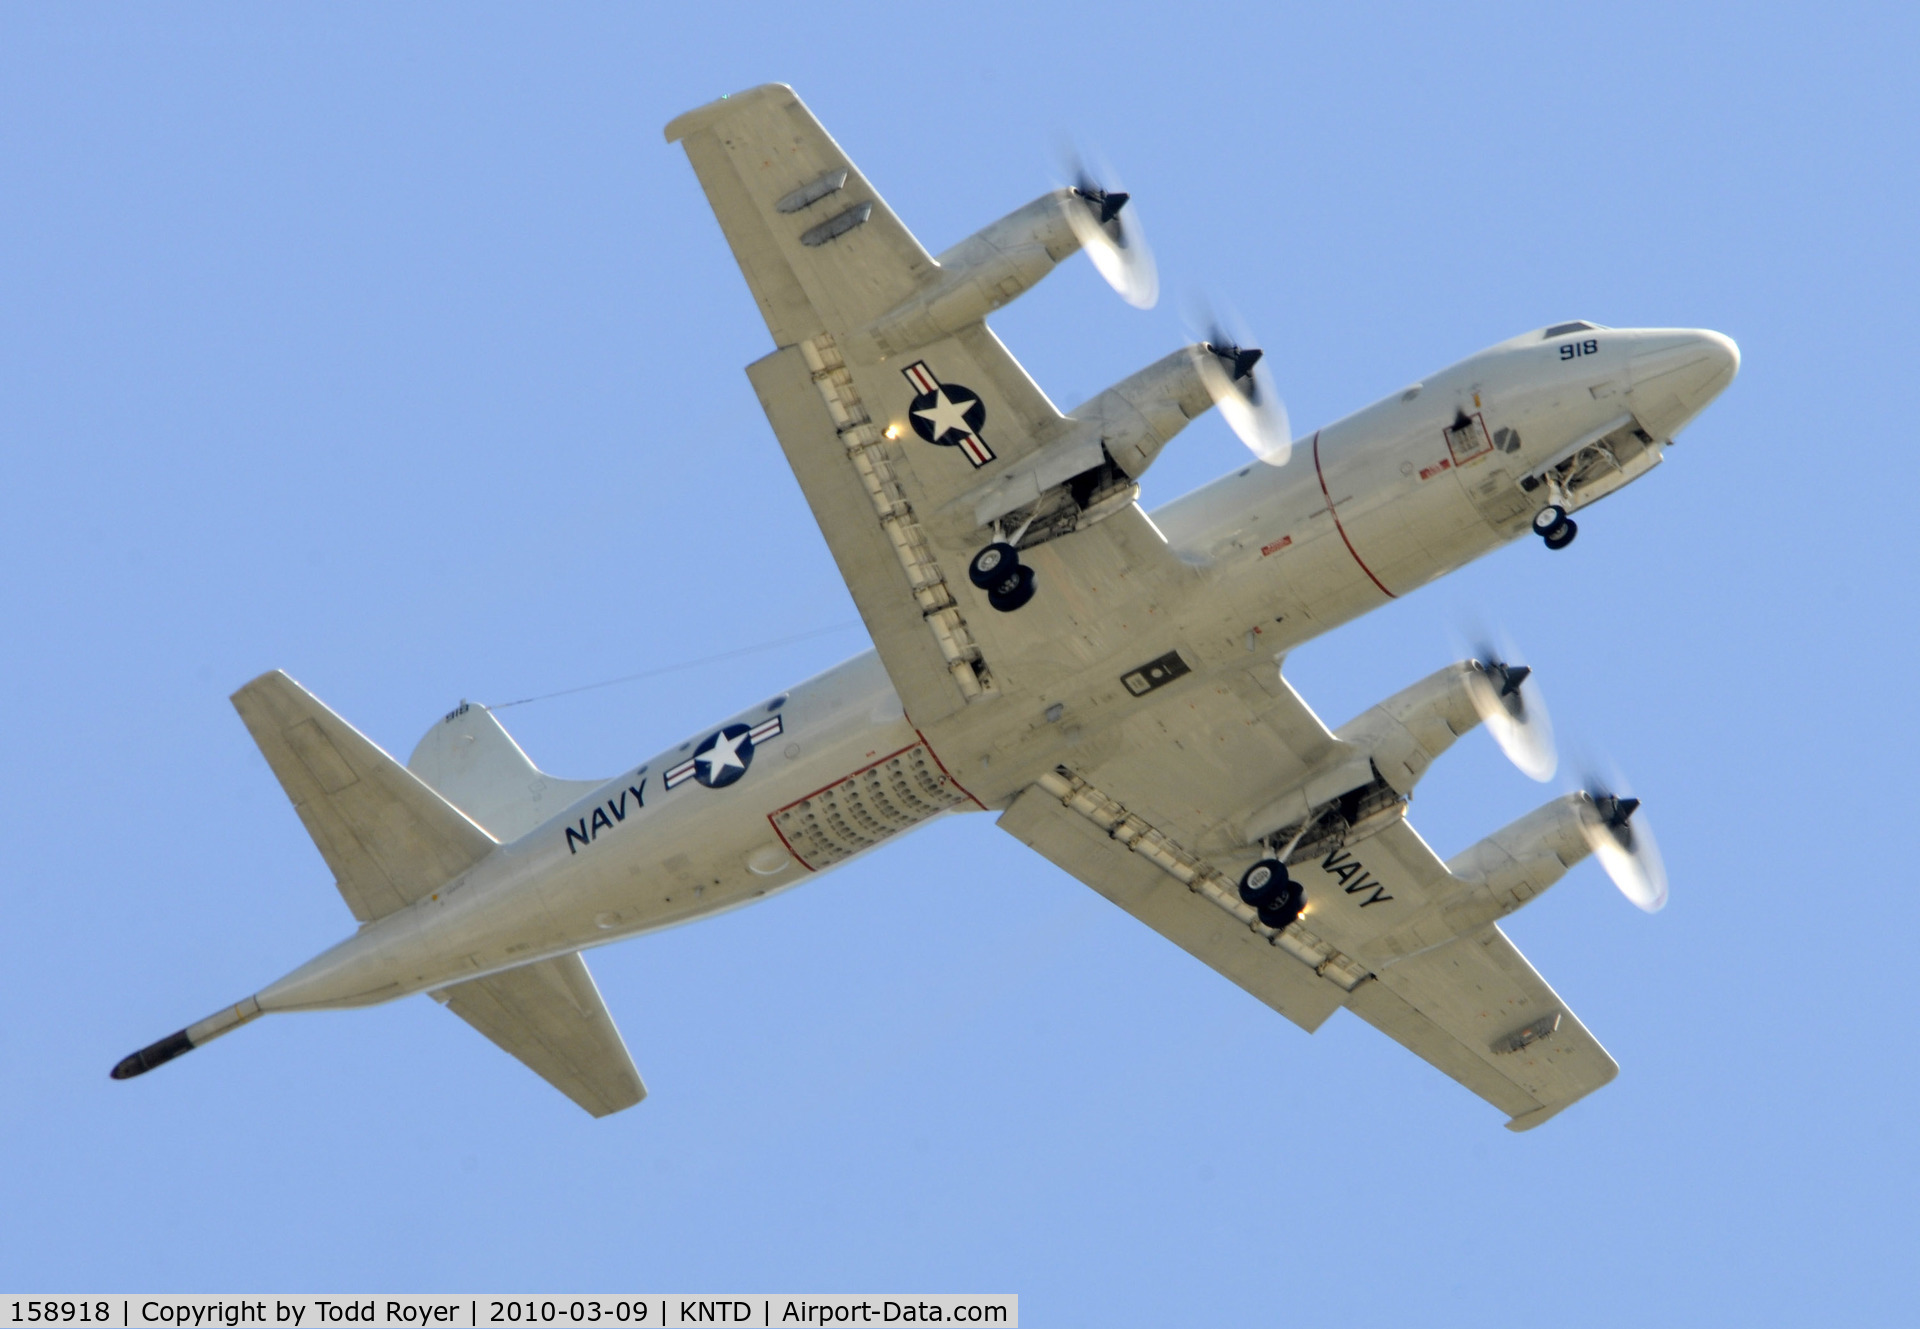 158918, Lockheed P-3C Orion C/N 285A-5590, From the backyard